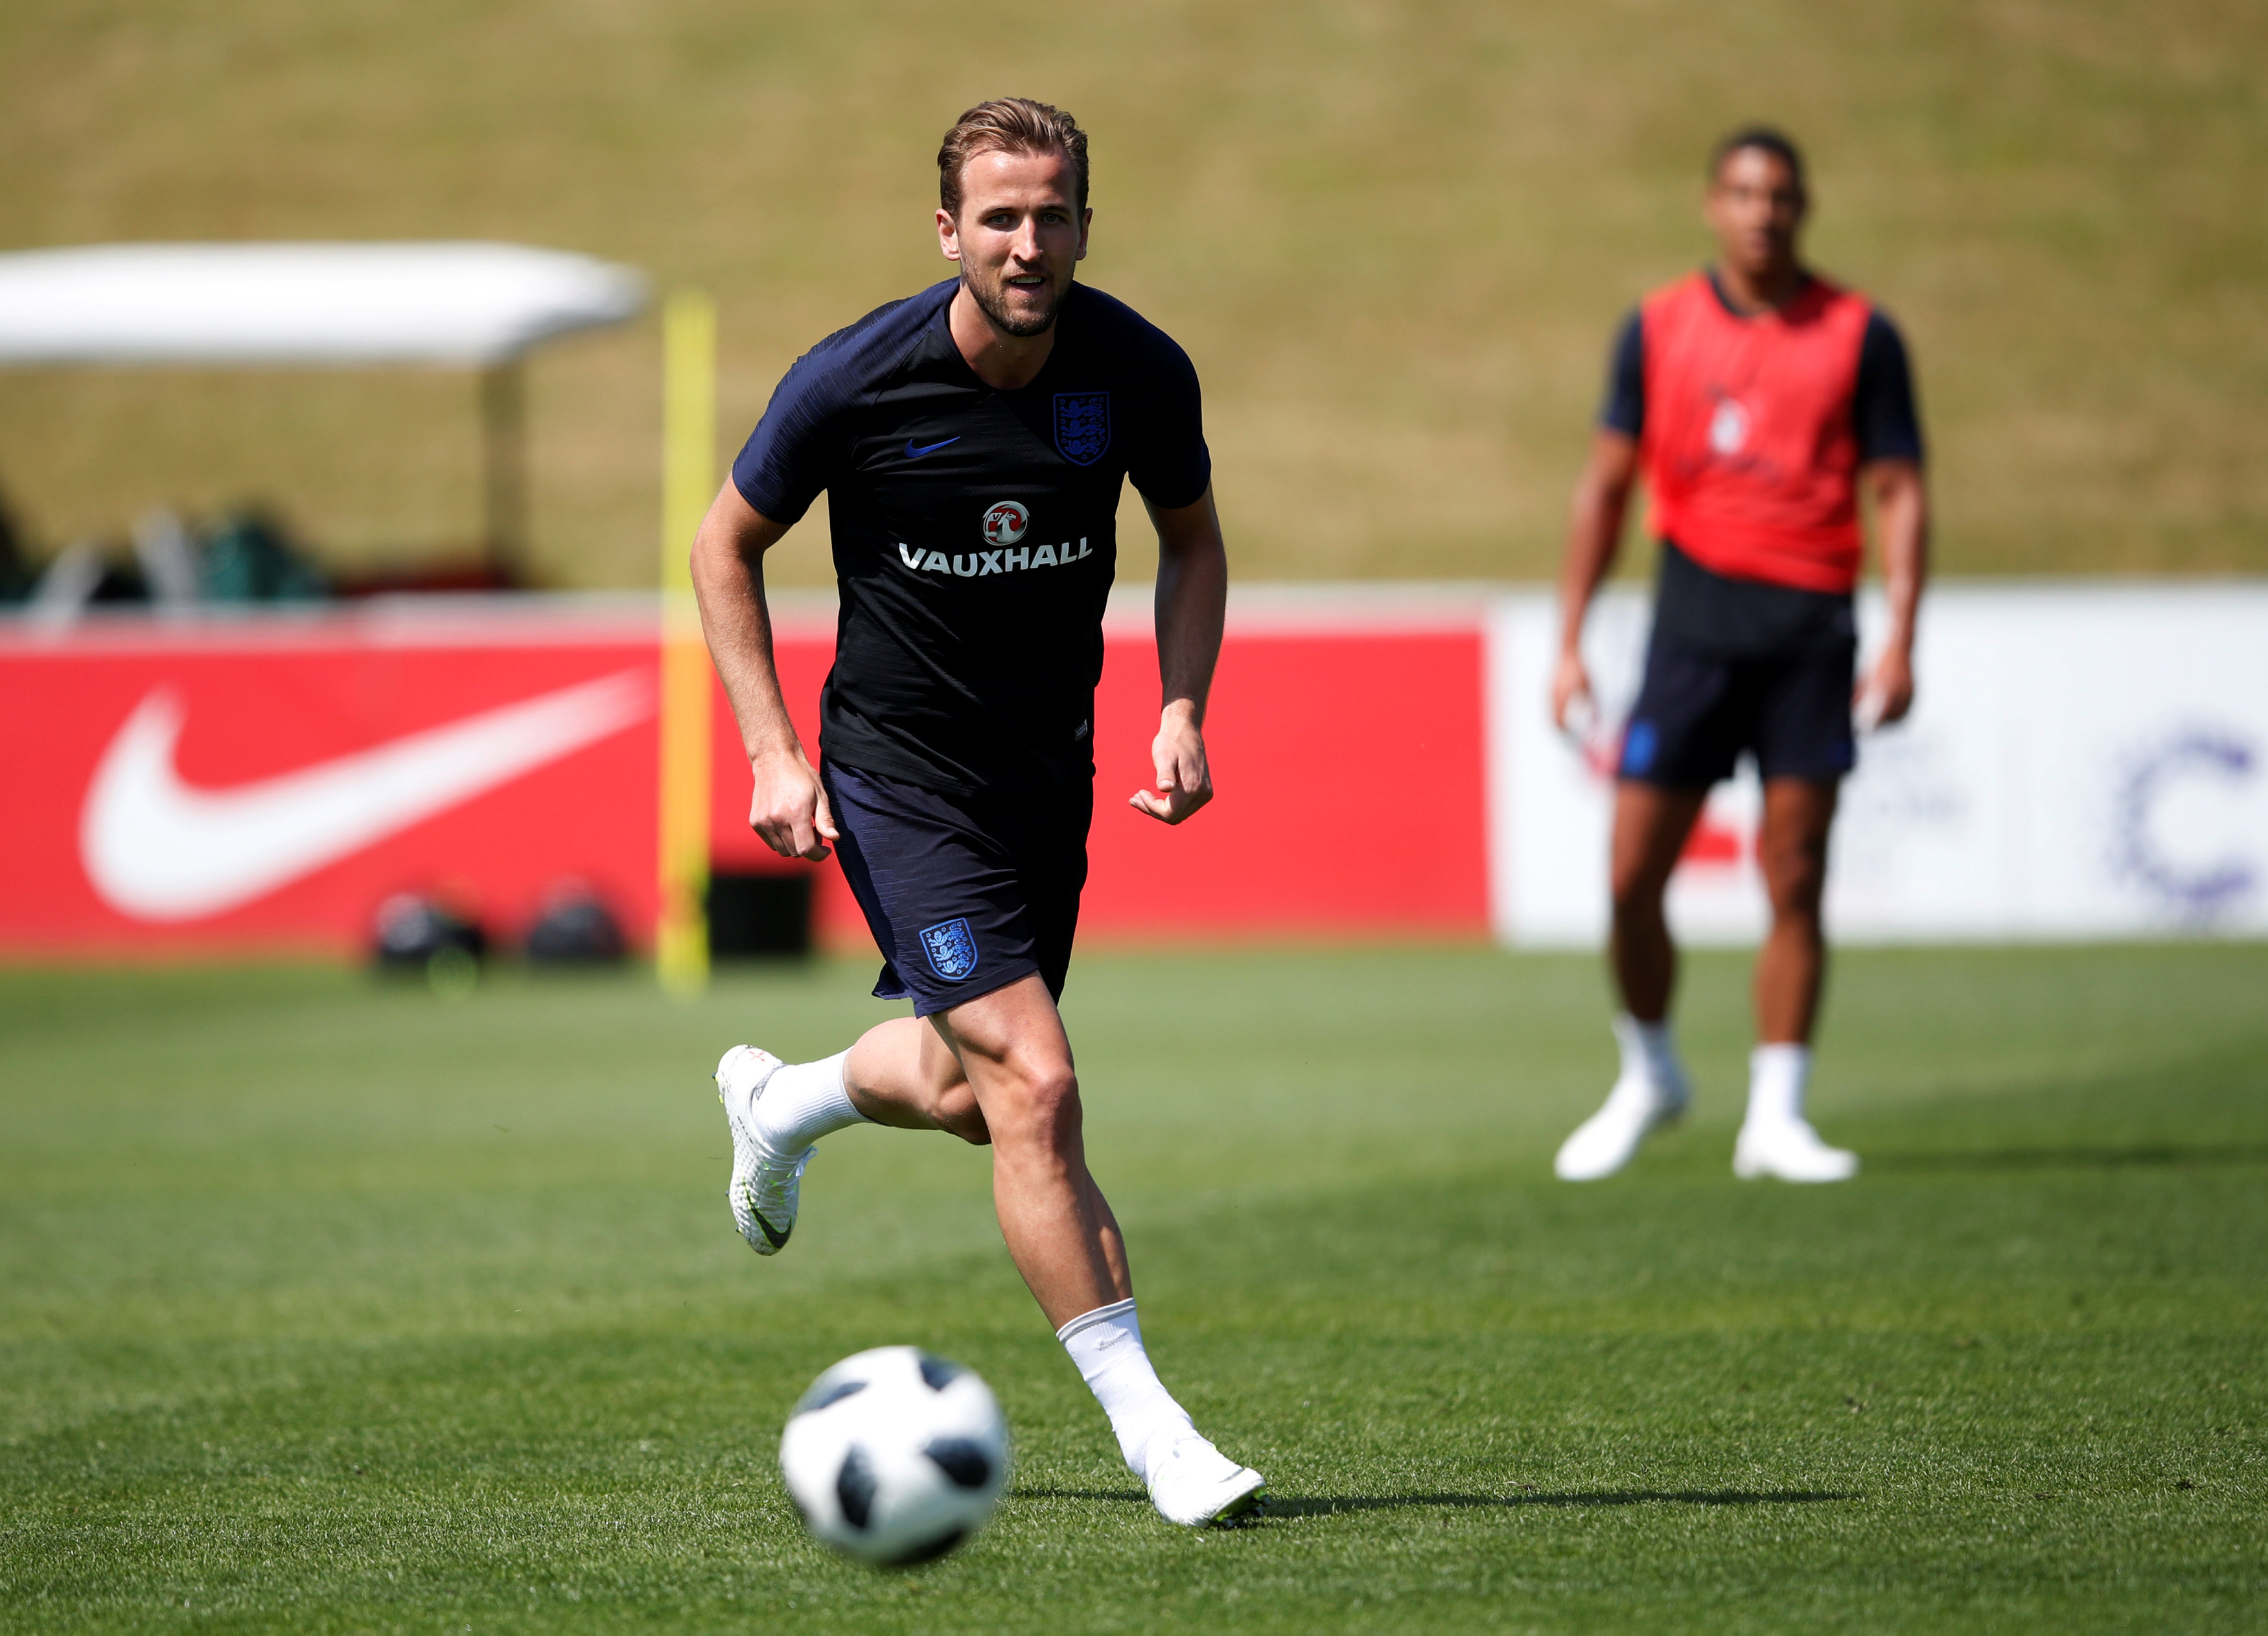 Football: Harry Kane to lead England in World Cup